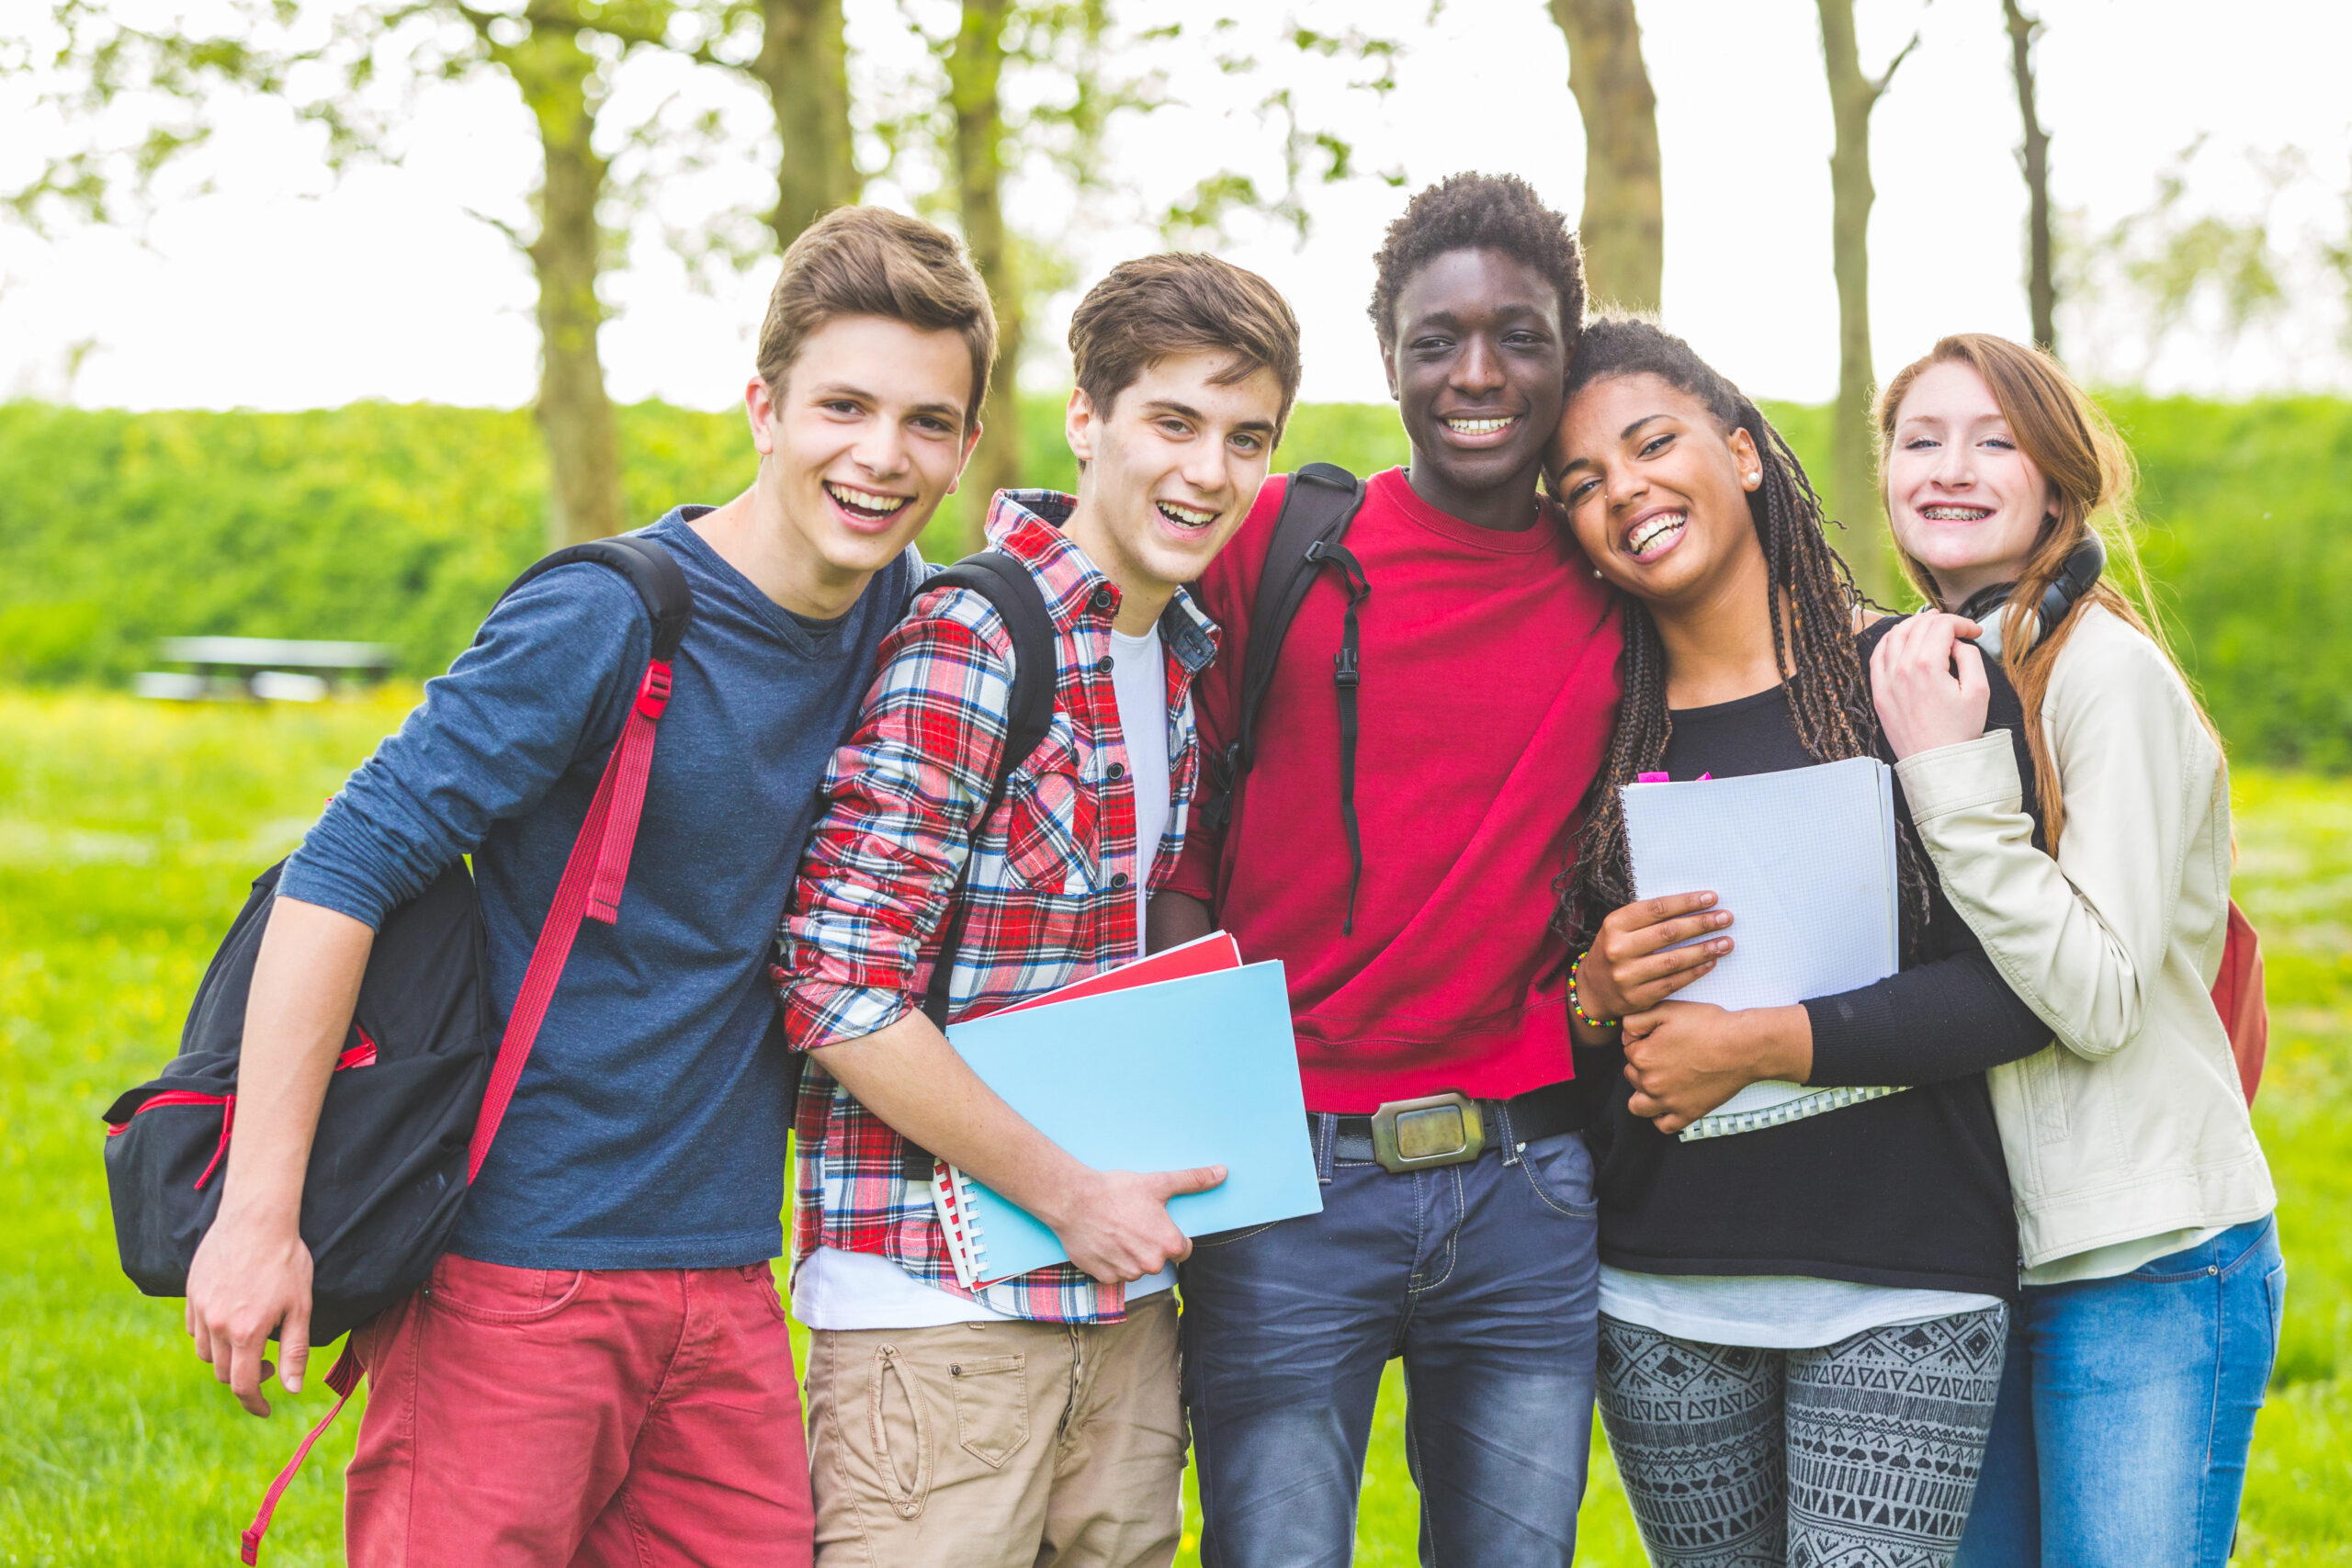 Group of multiethnic teenage students embraced together at park. Two boys and one girl are caucasian, one boy and one girl are black. Friendship, immigration, integration and multicultural concepts.